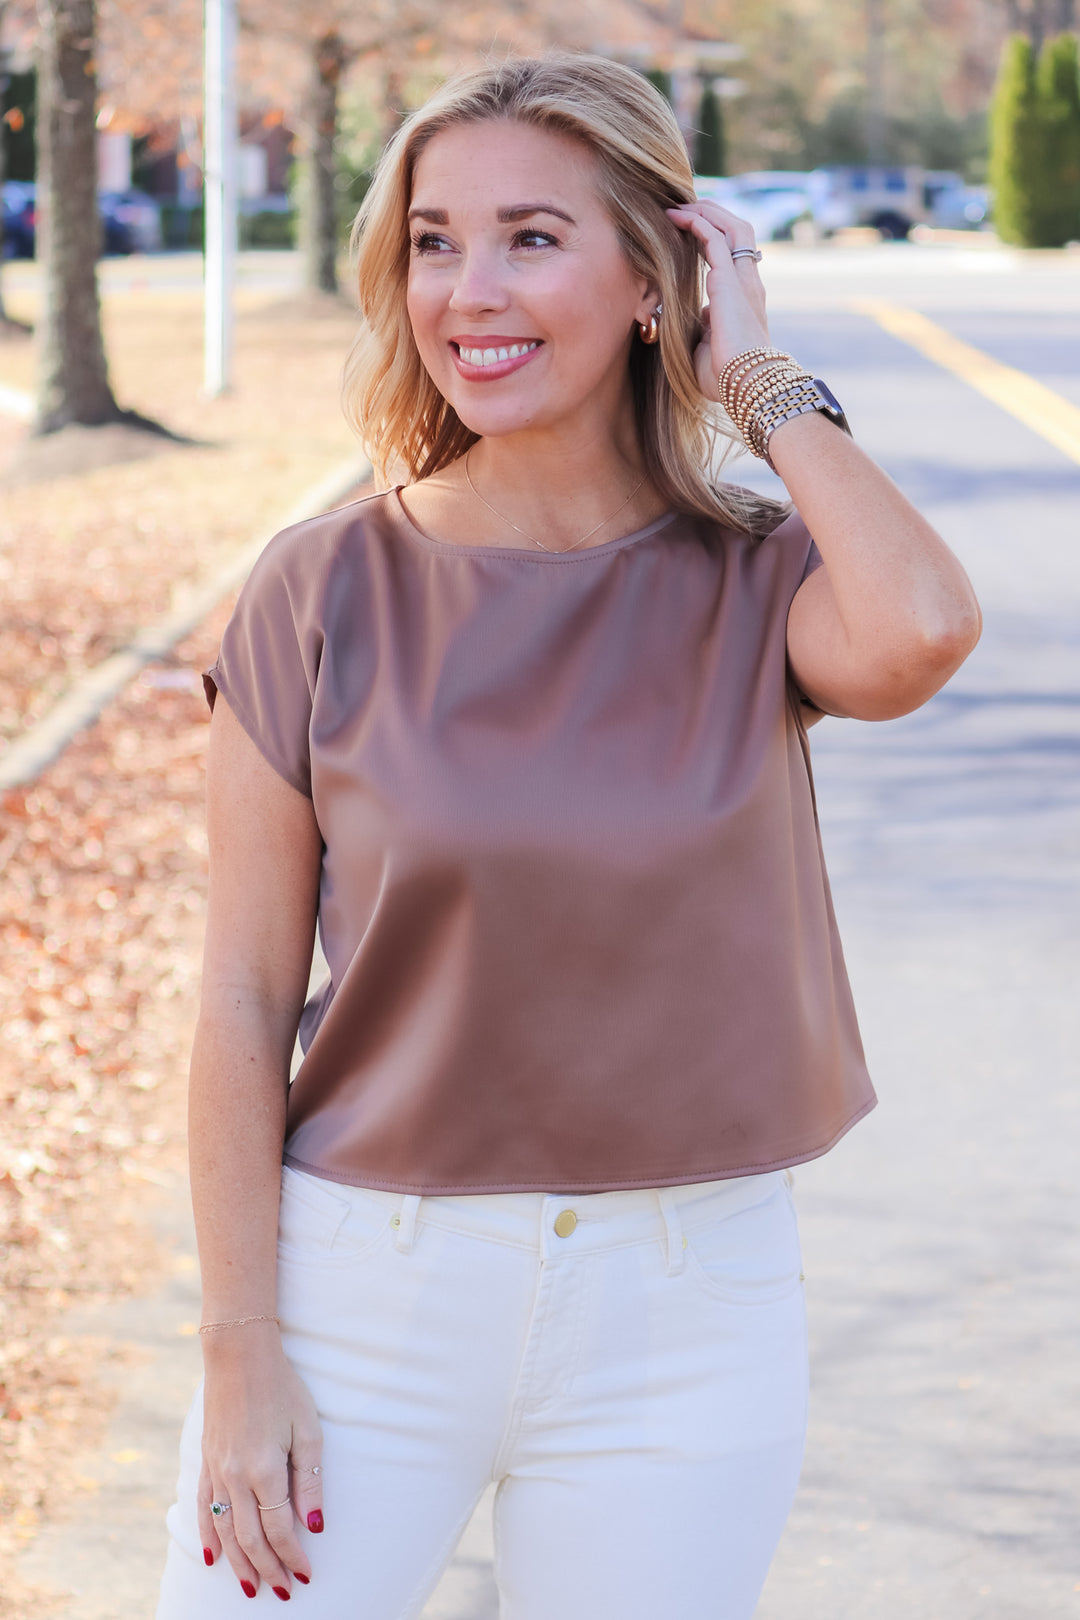 A blonde woman standing outside wearing a coffee colored satin blouse with cap sleeves and cream colored jeans.